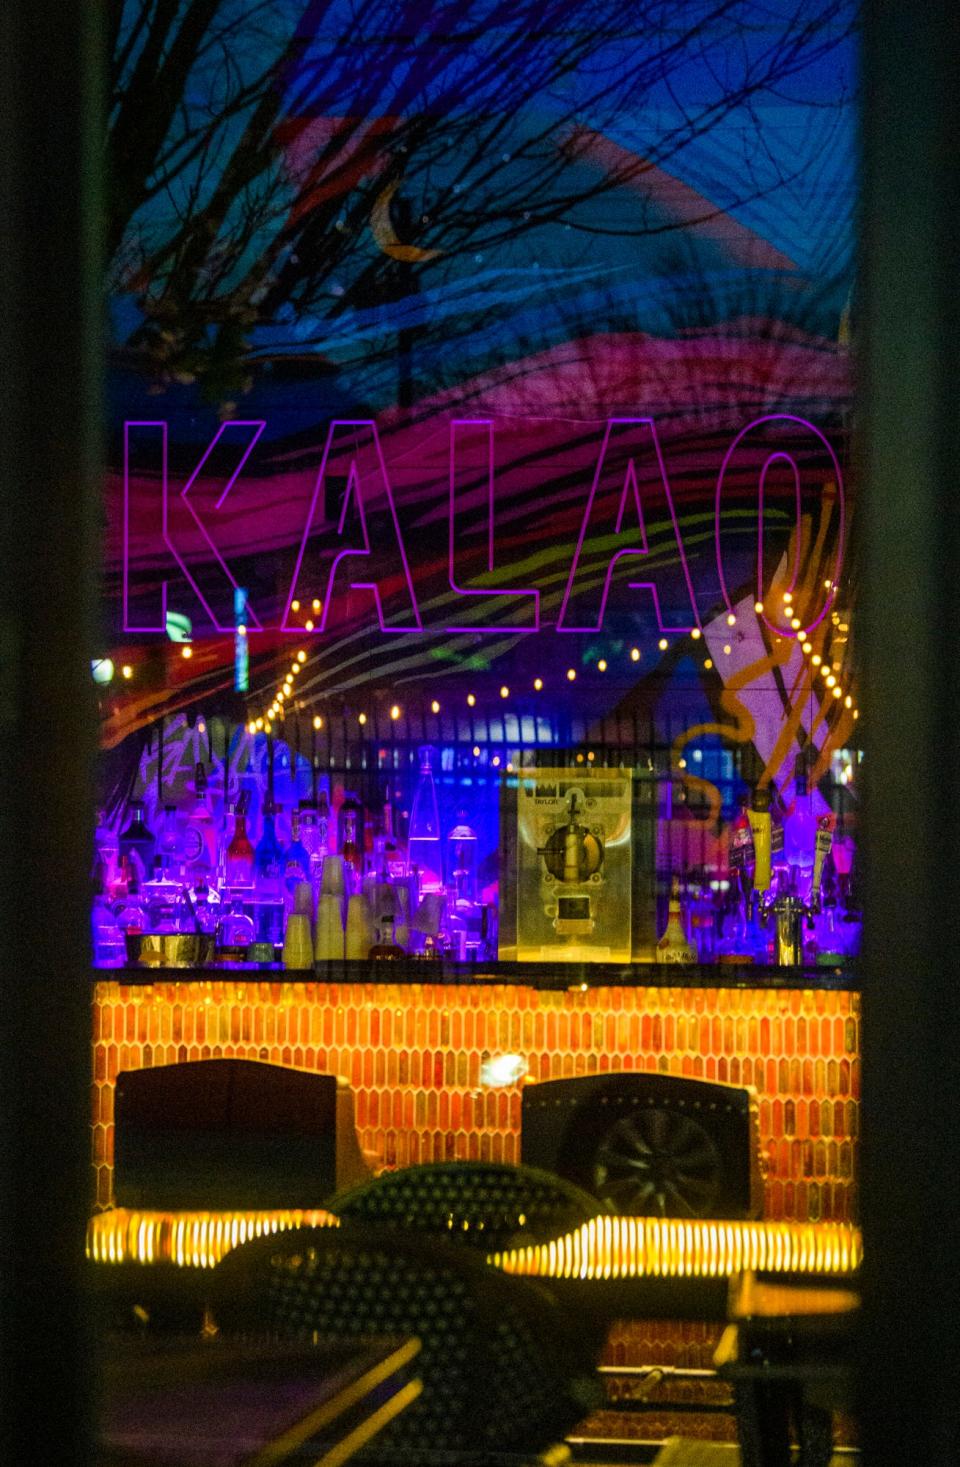 Kalao Restaurant and Nightclub were empty on April 23, 2023, after three people were shot inside early that morning. The restaurant and bar are now permanently closed.